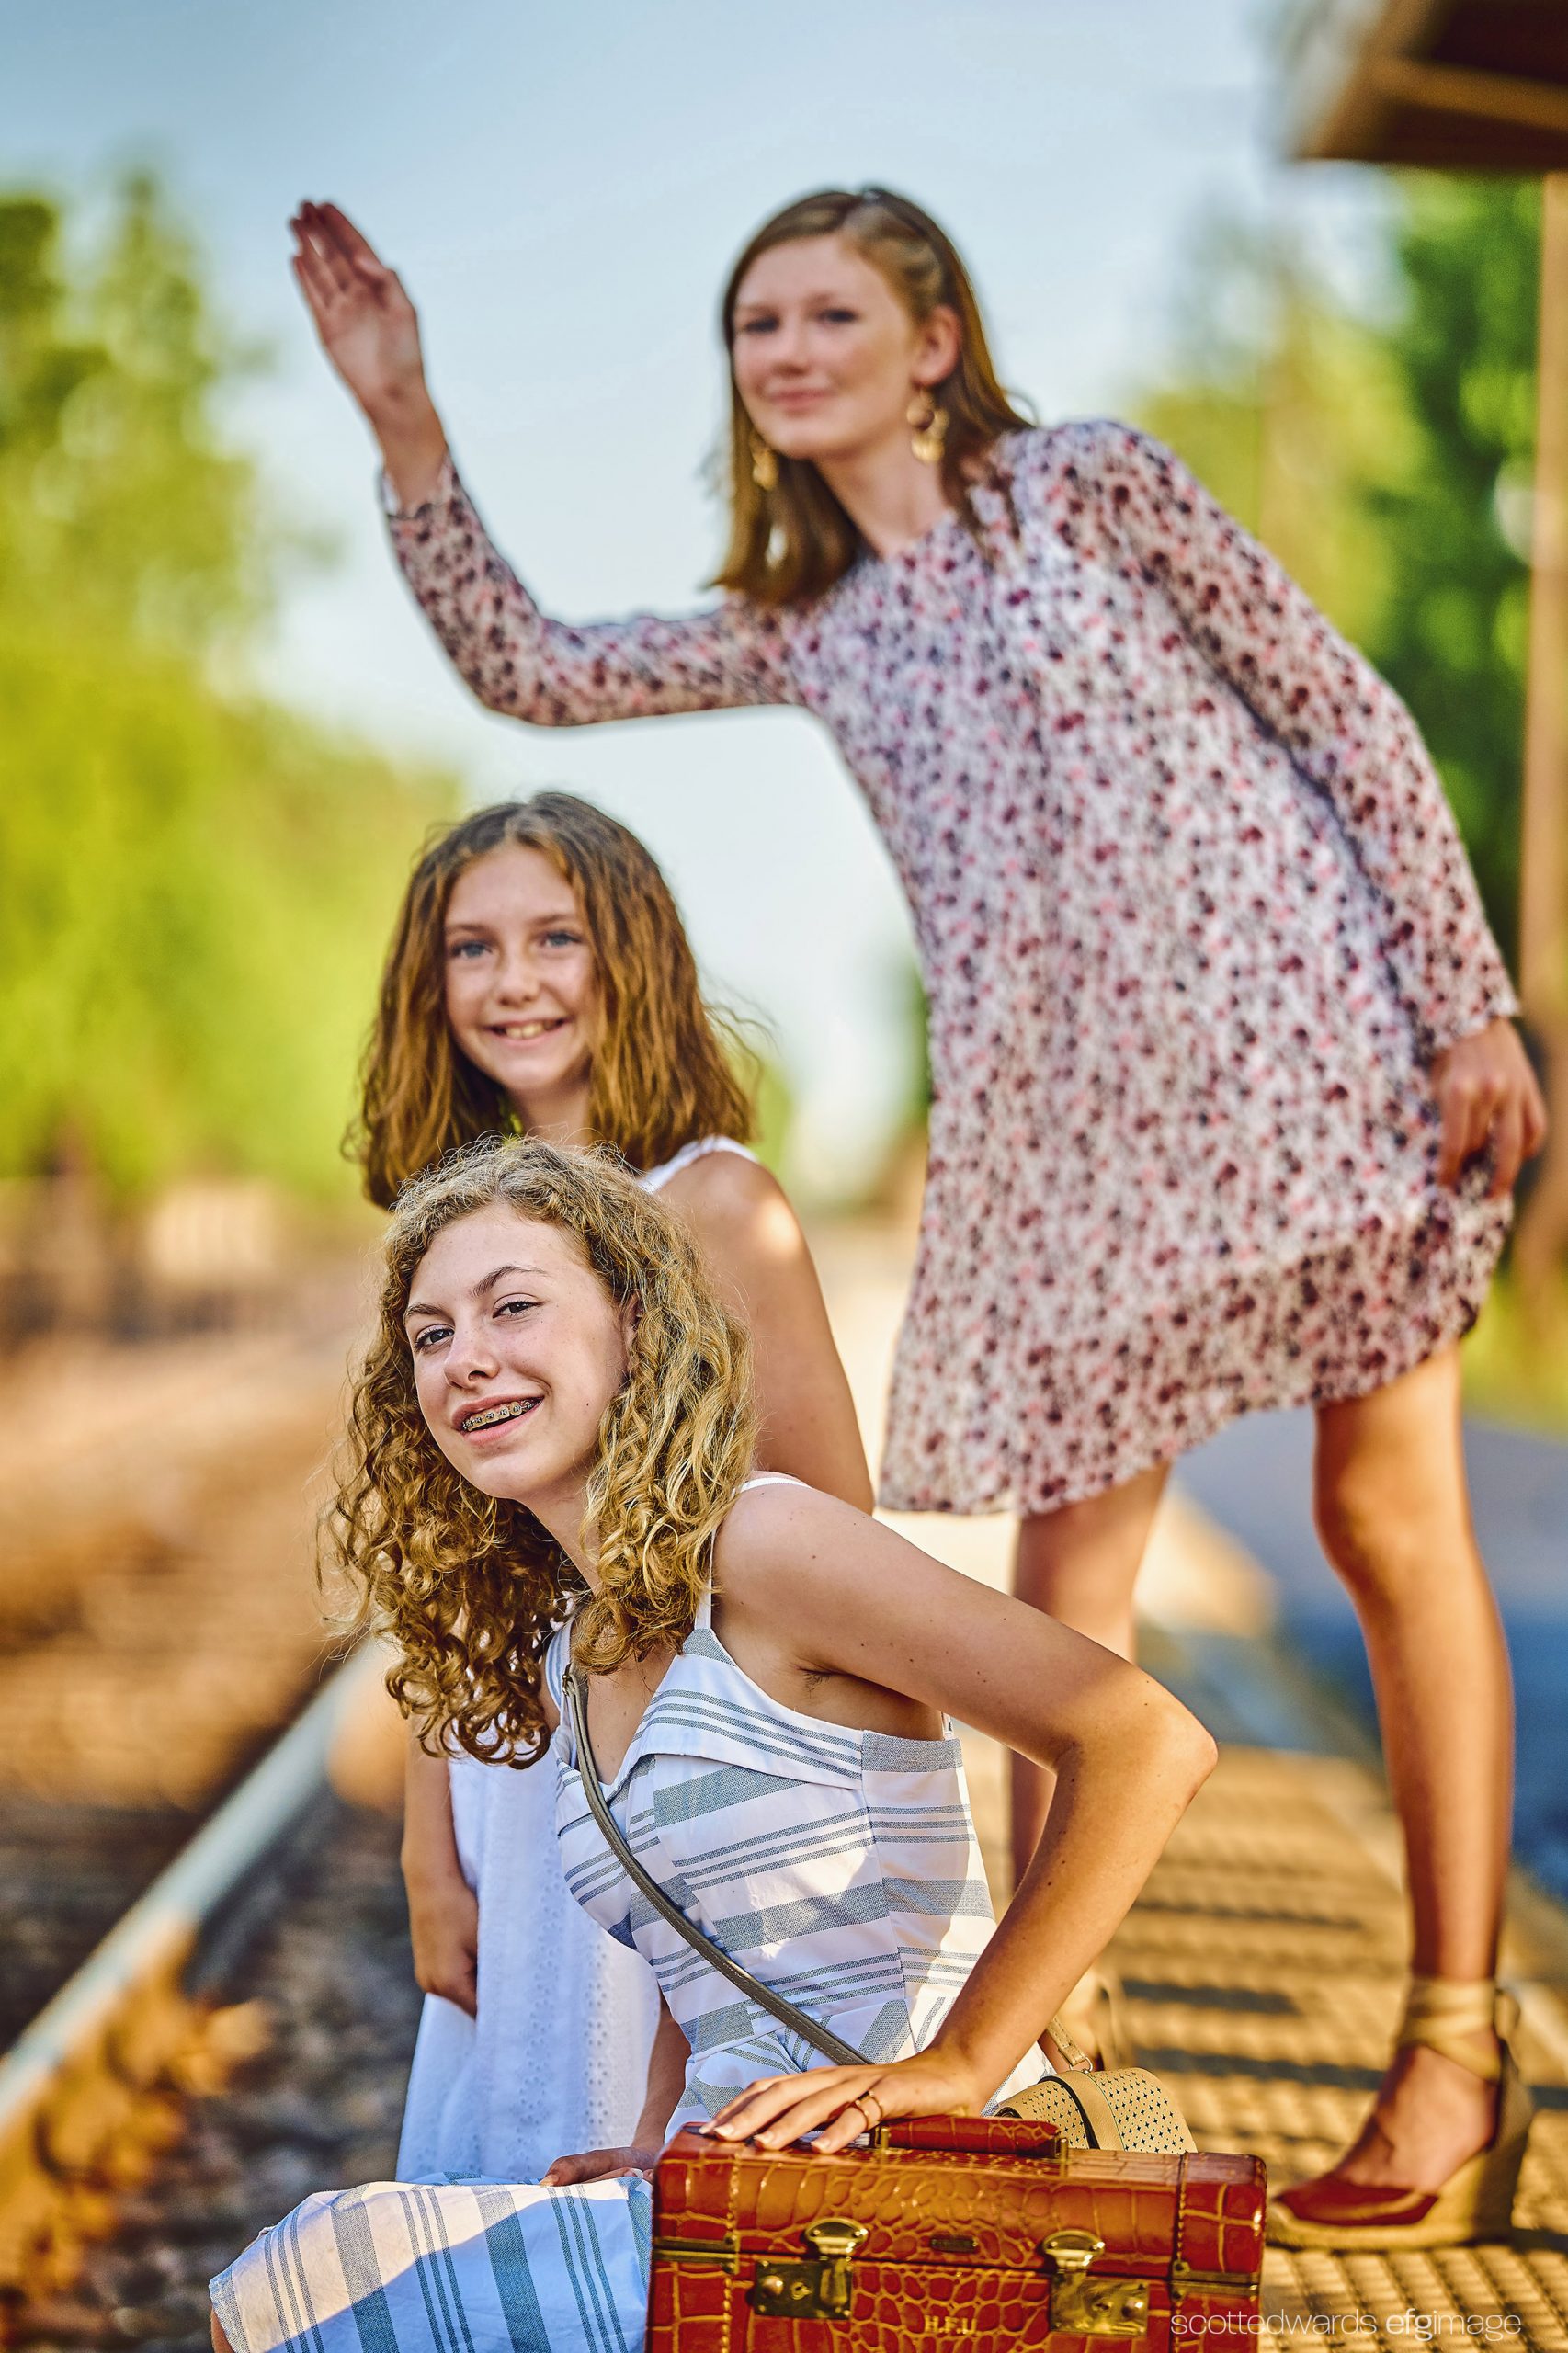 young girls by train tracks